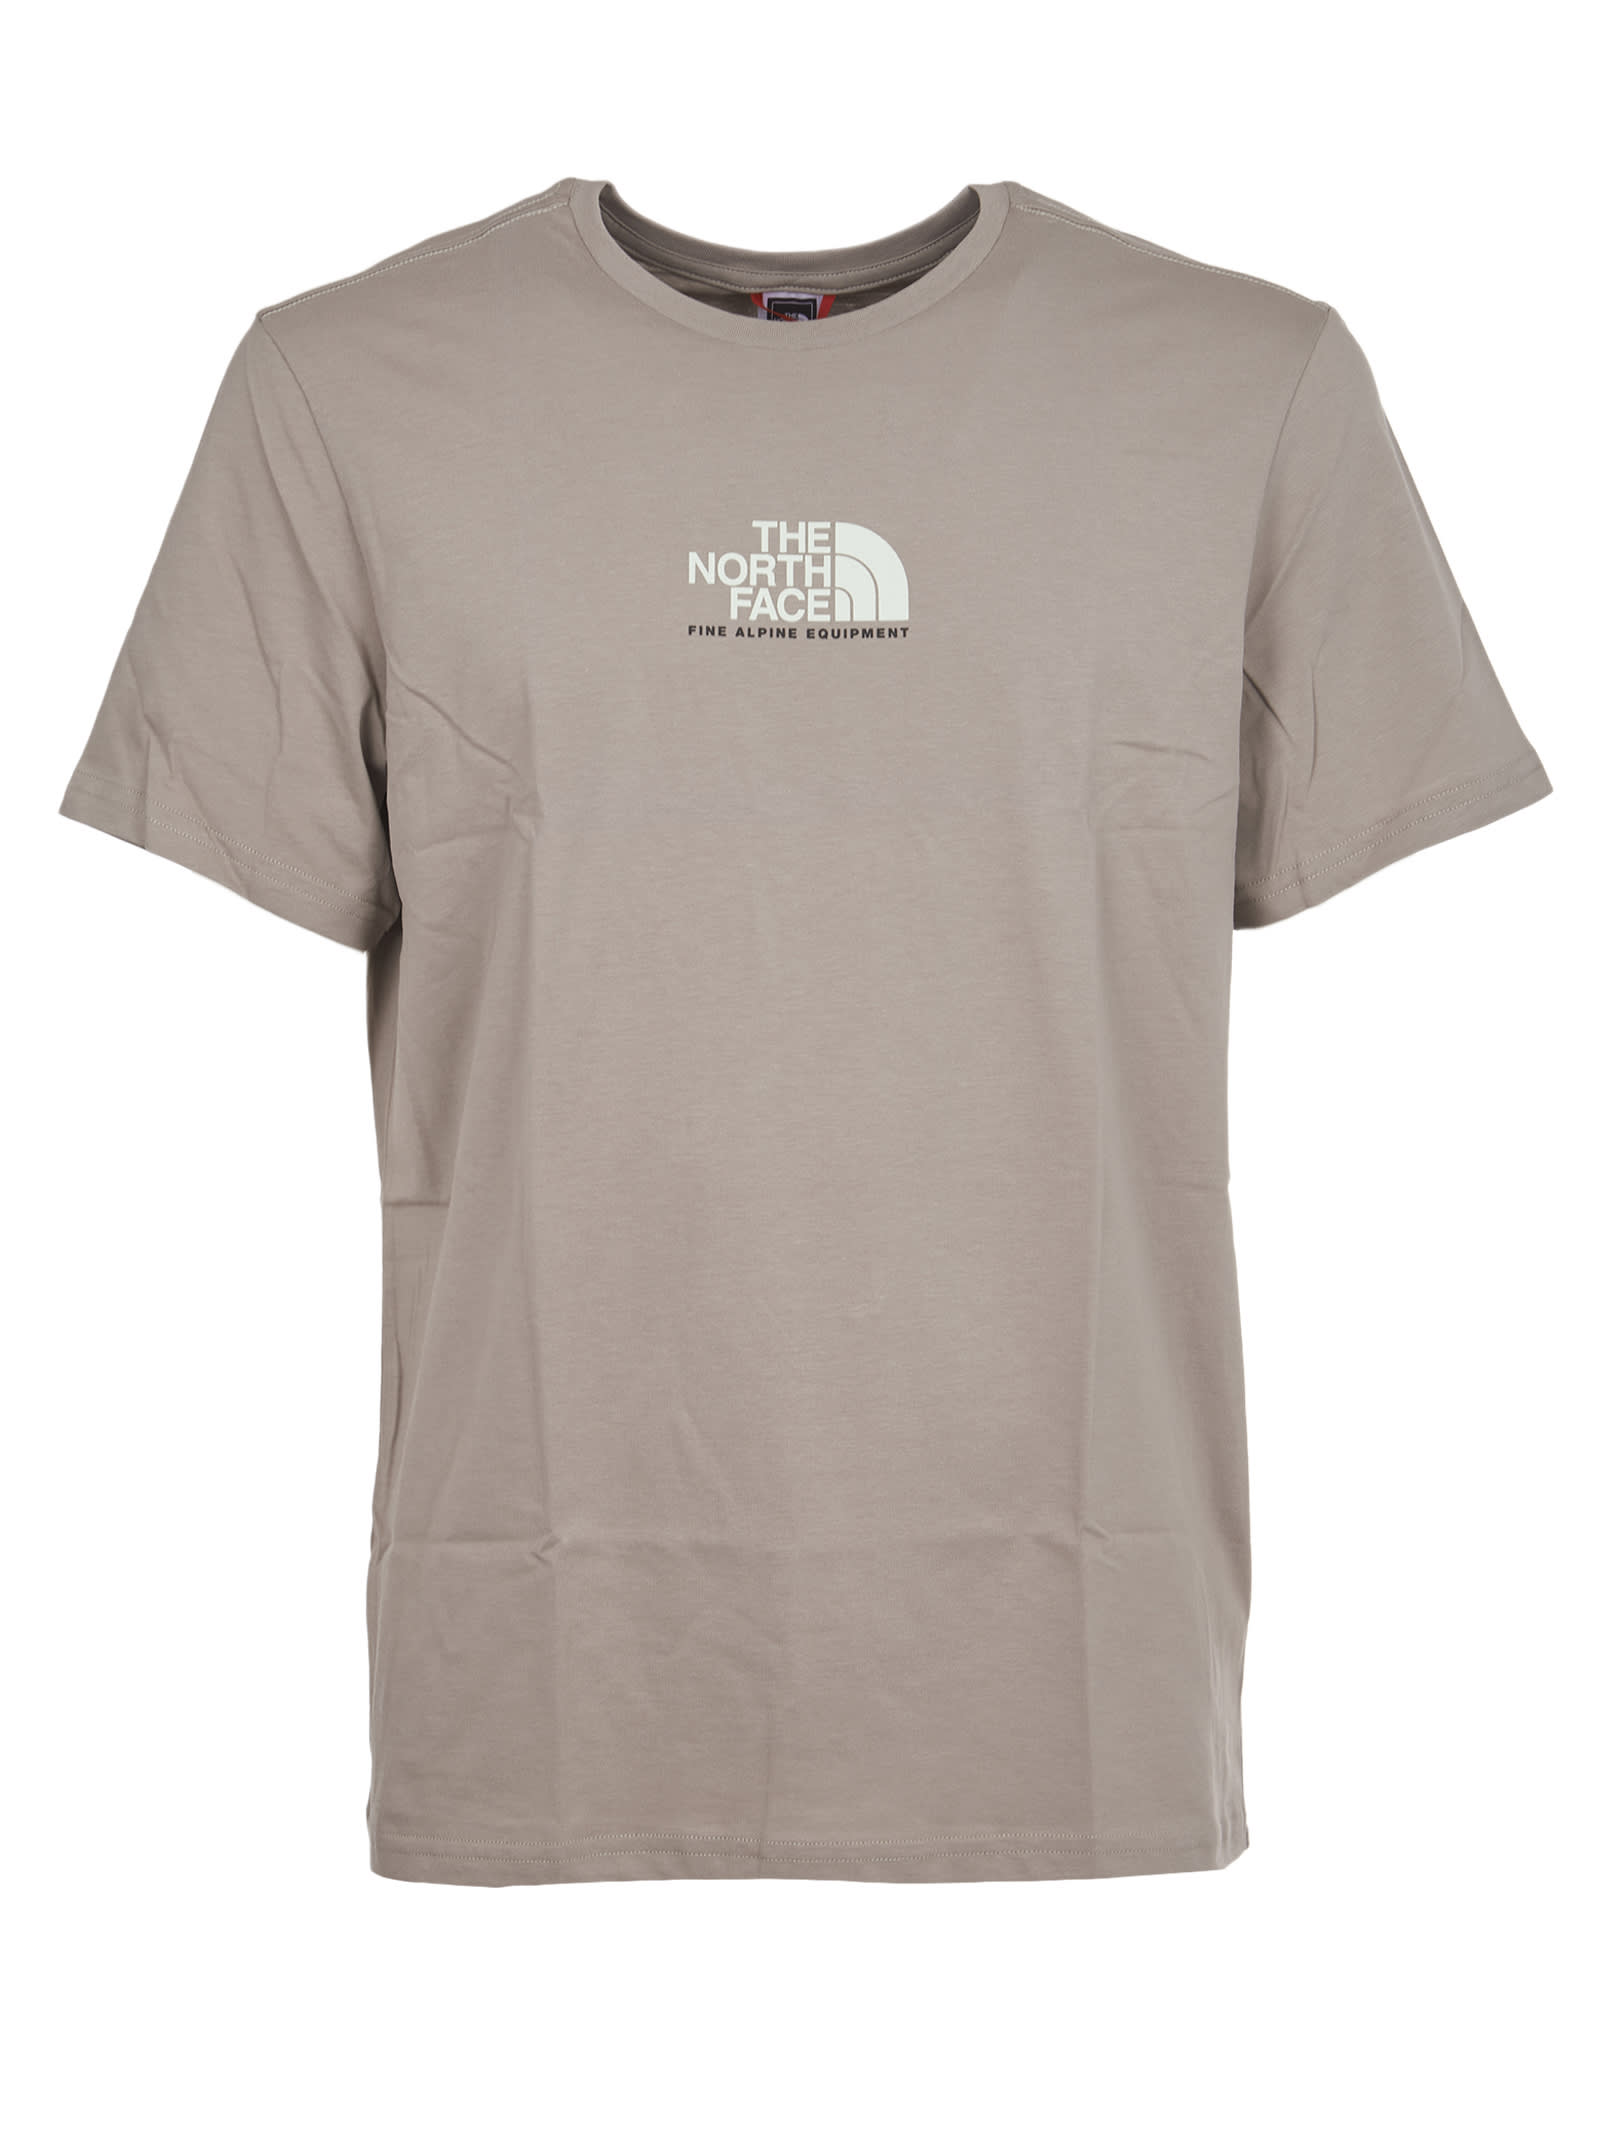 The North Face Fine Alpine Mineral Grey T-shirt